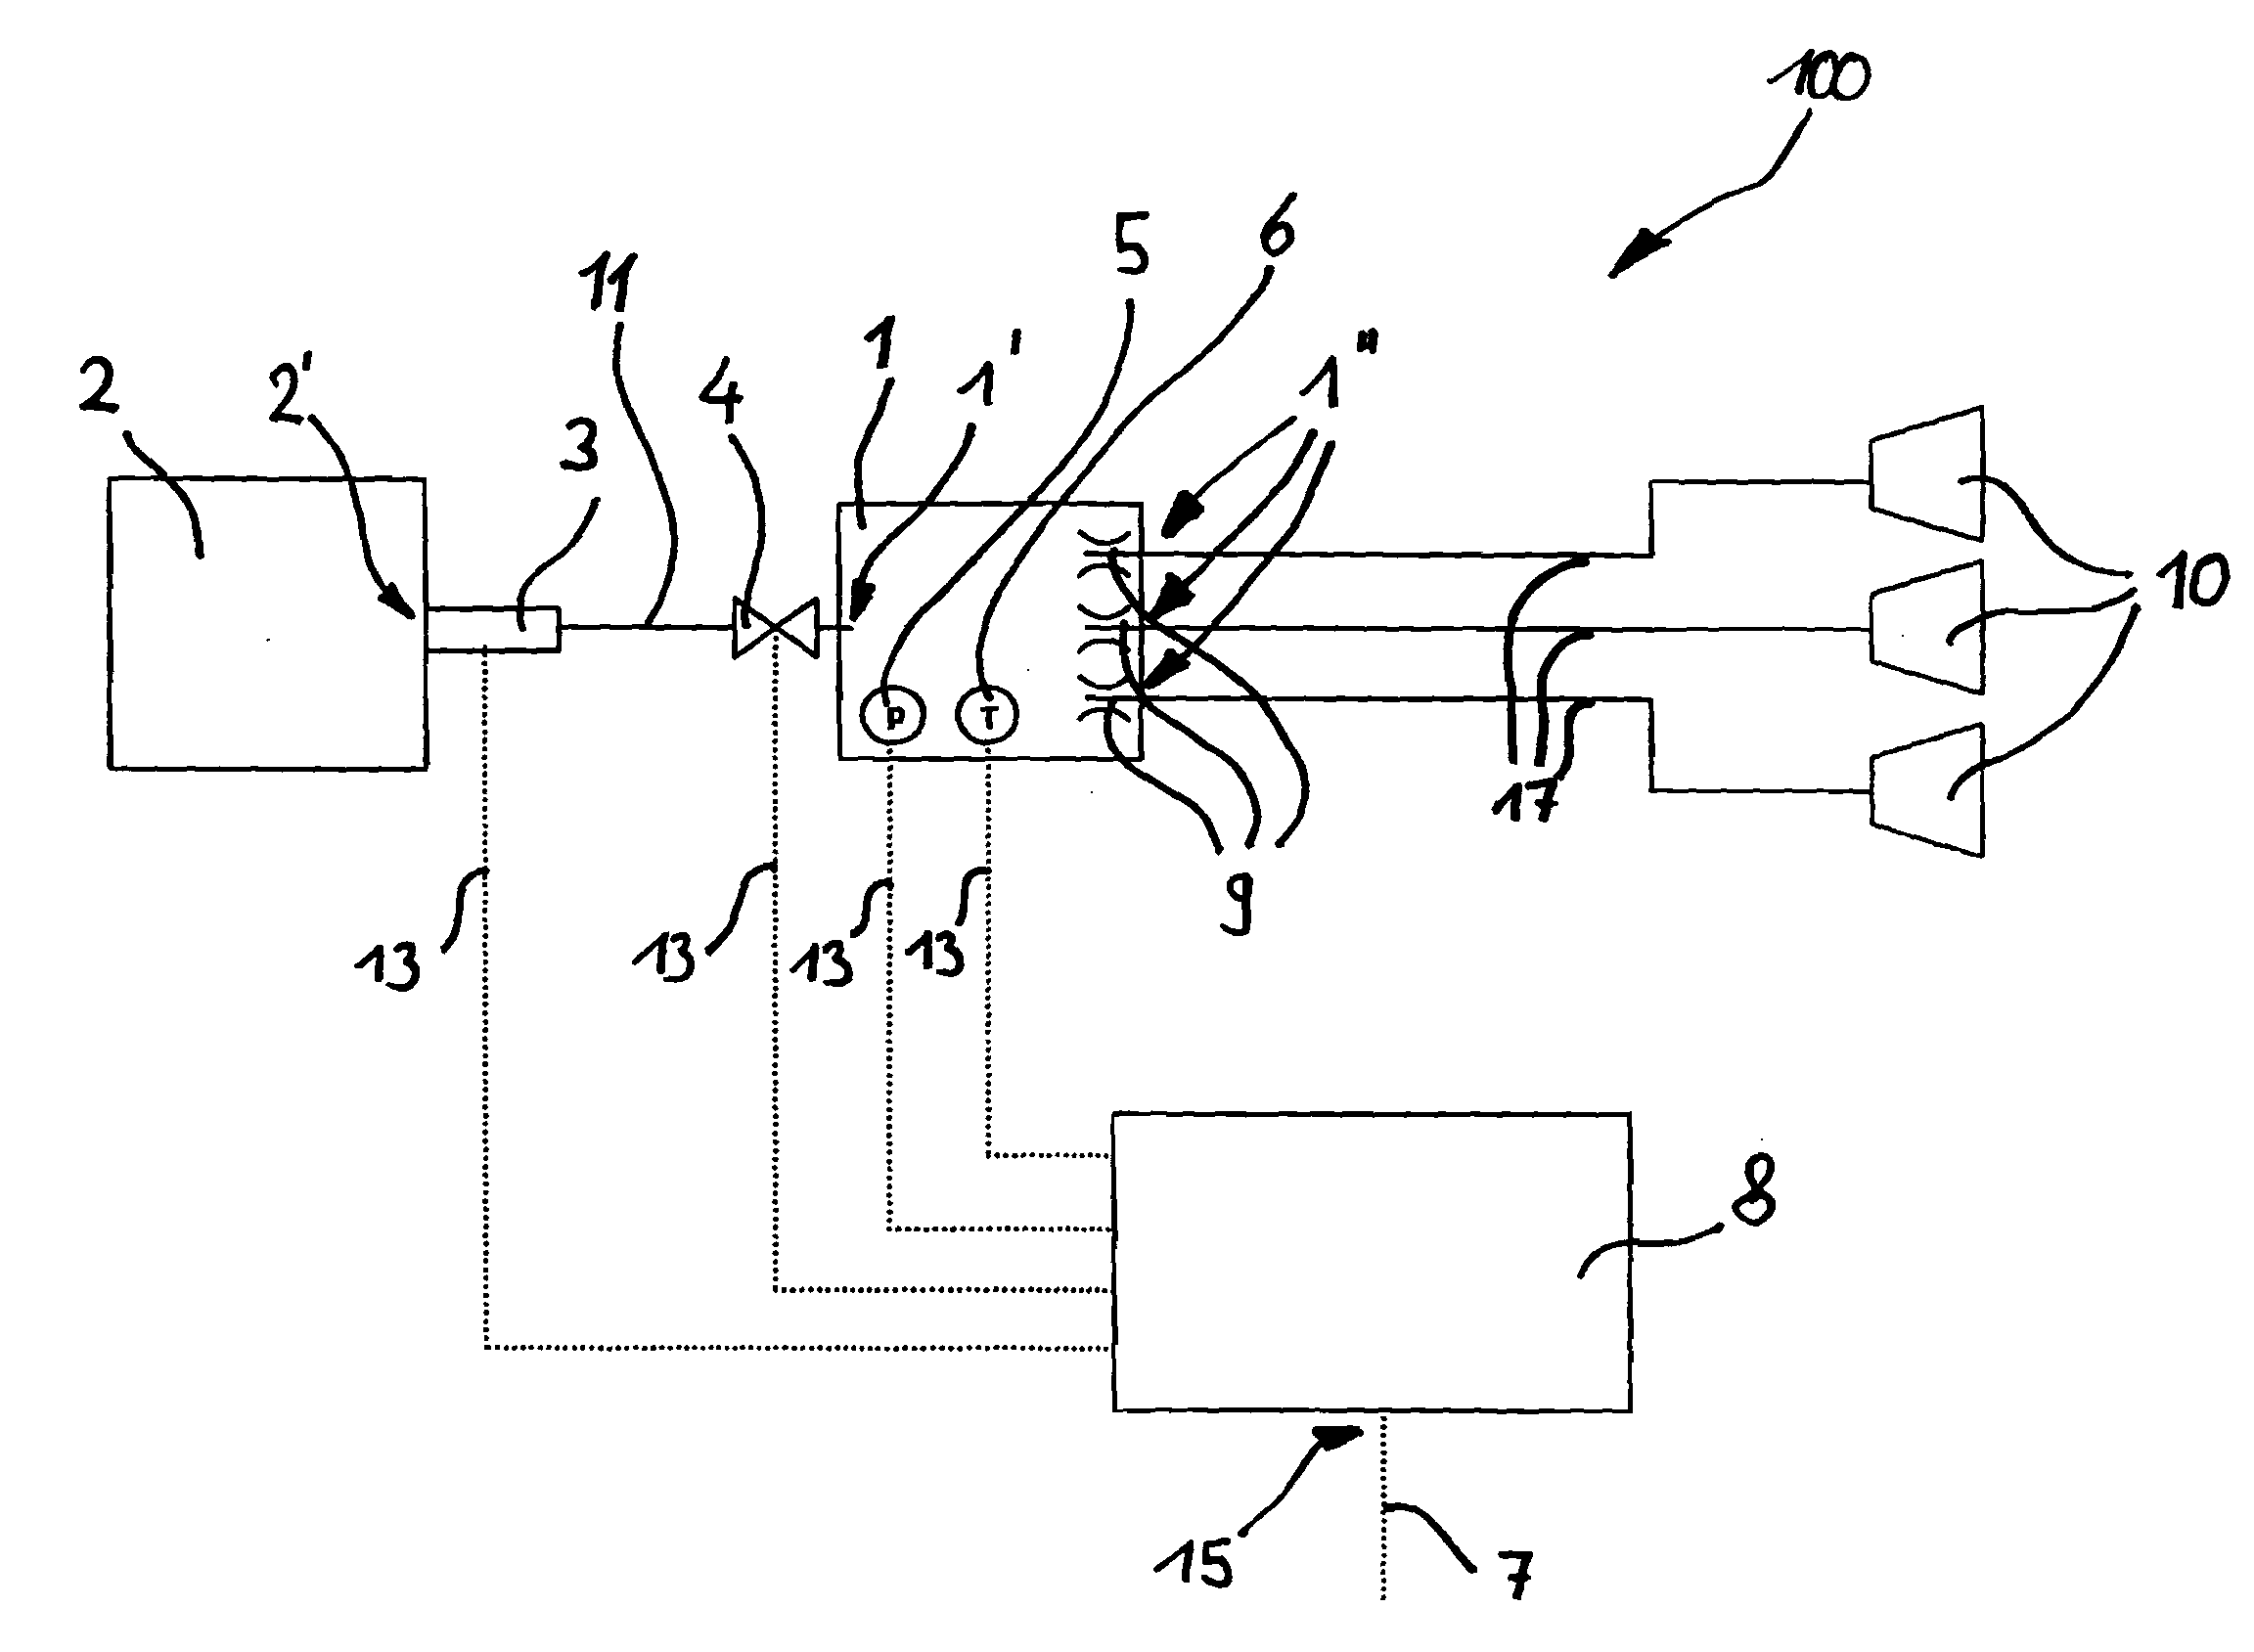 Oxygen breathing device with mass flow control